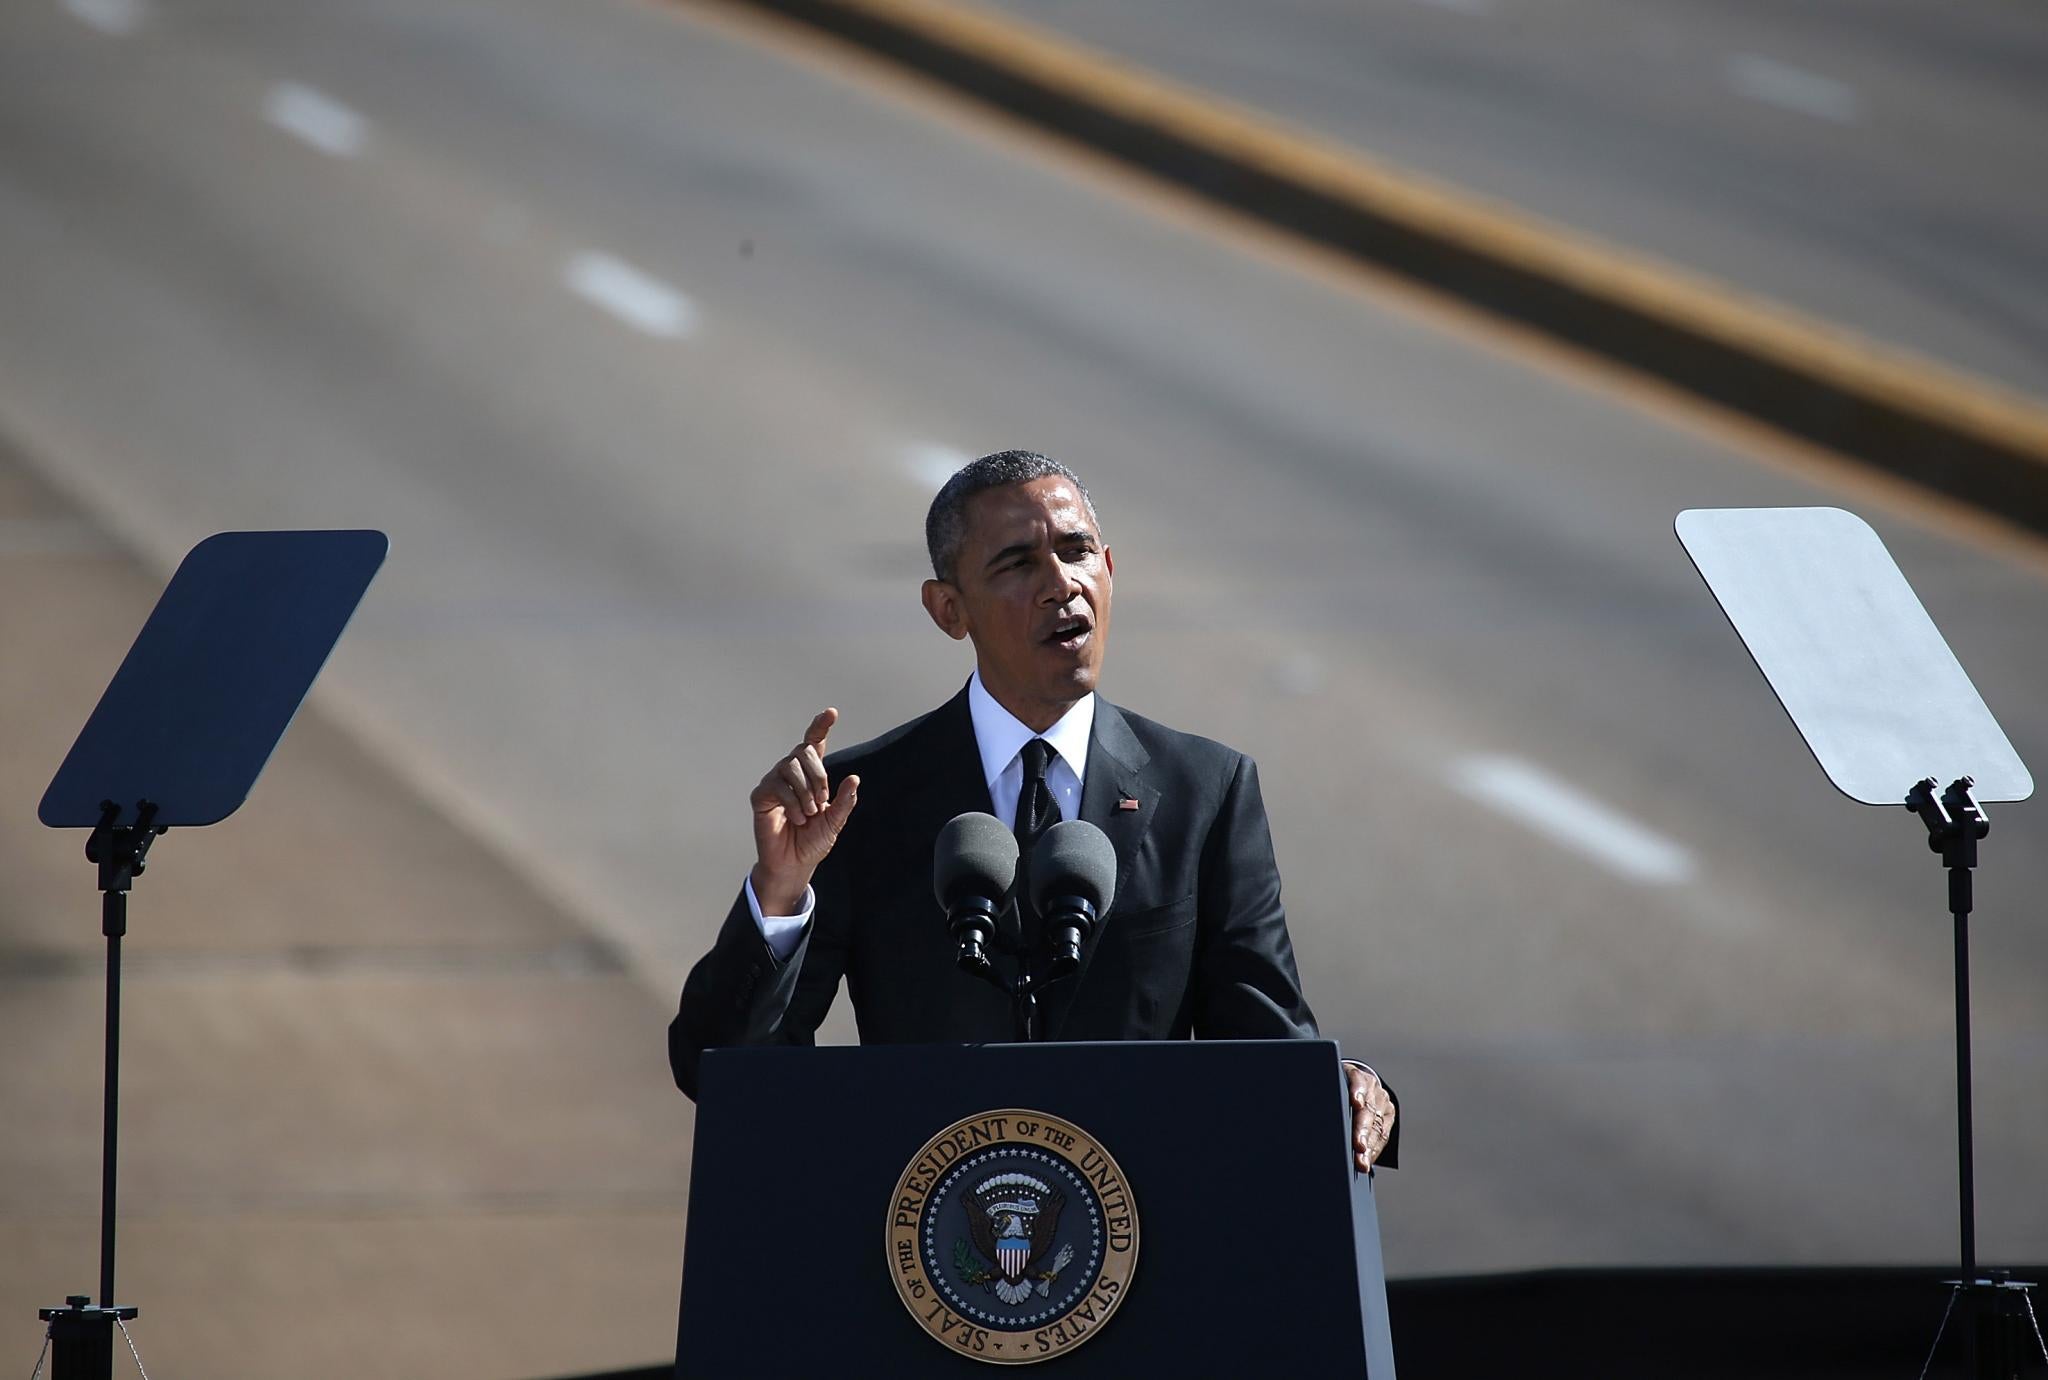 7 Times President Obama Has Spoken Candidly About Race in America